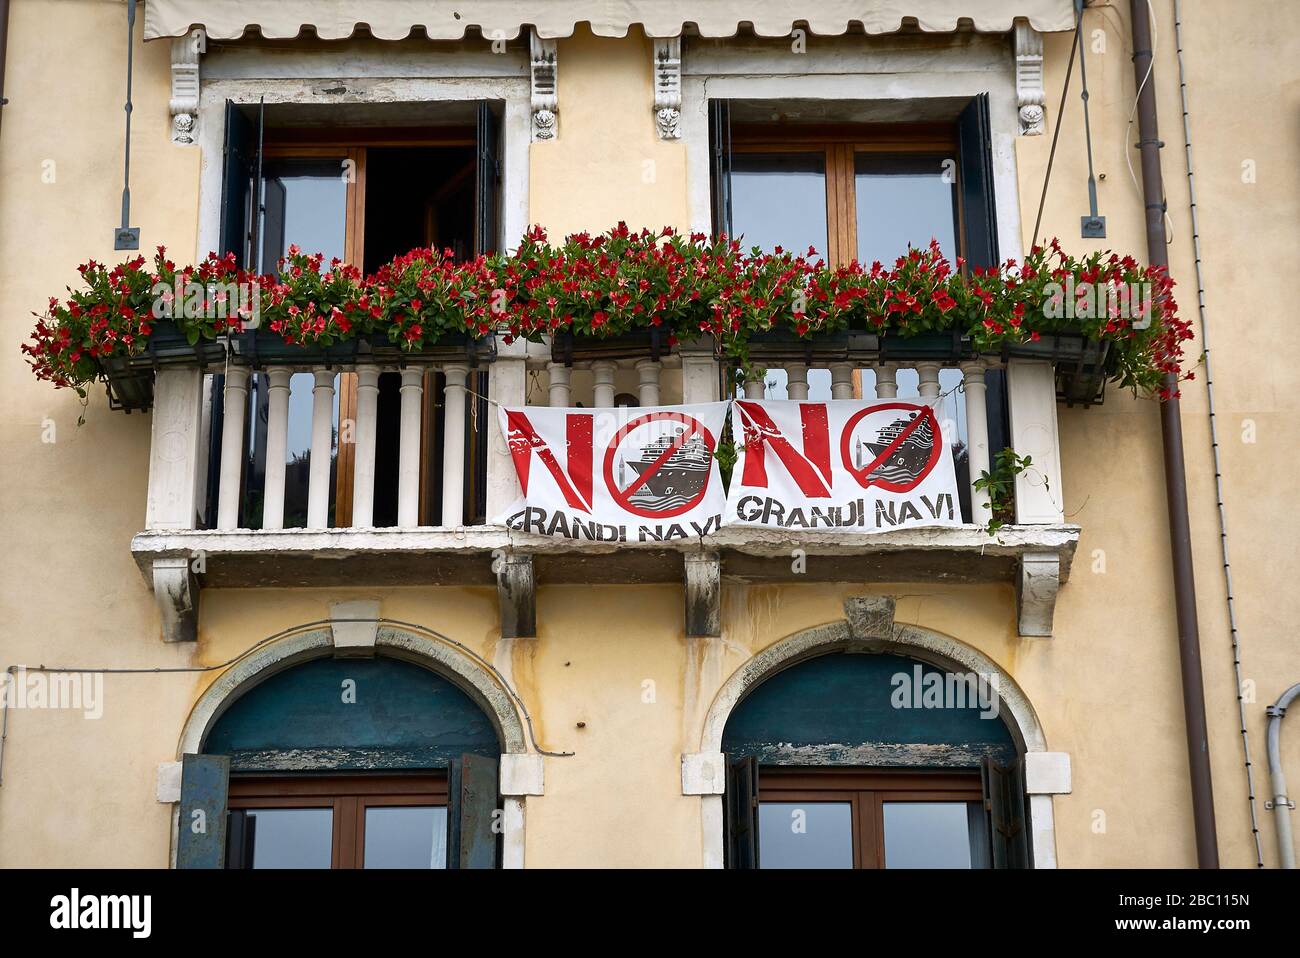 No to cruise ships in Venice. Protest against the increasing of cruise ships visiting Venice. Stock Photo